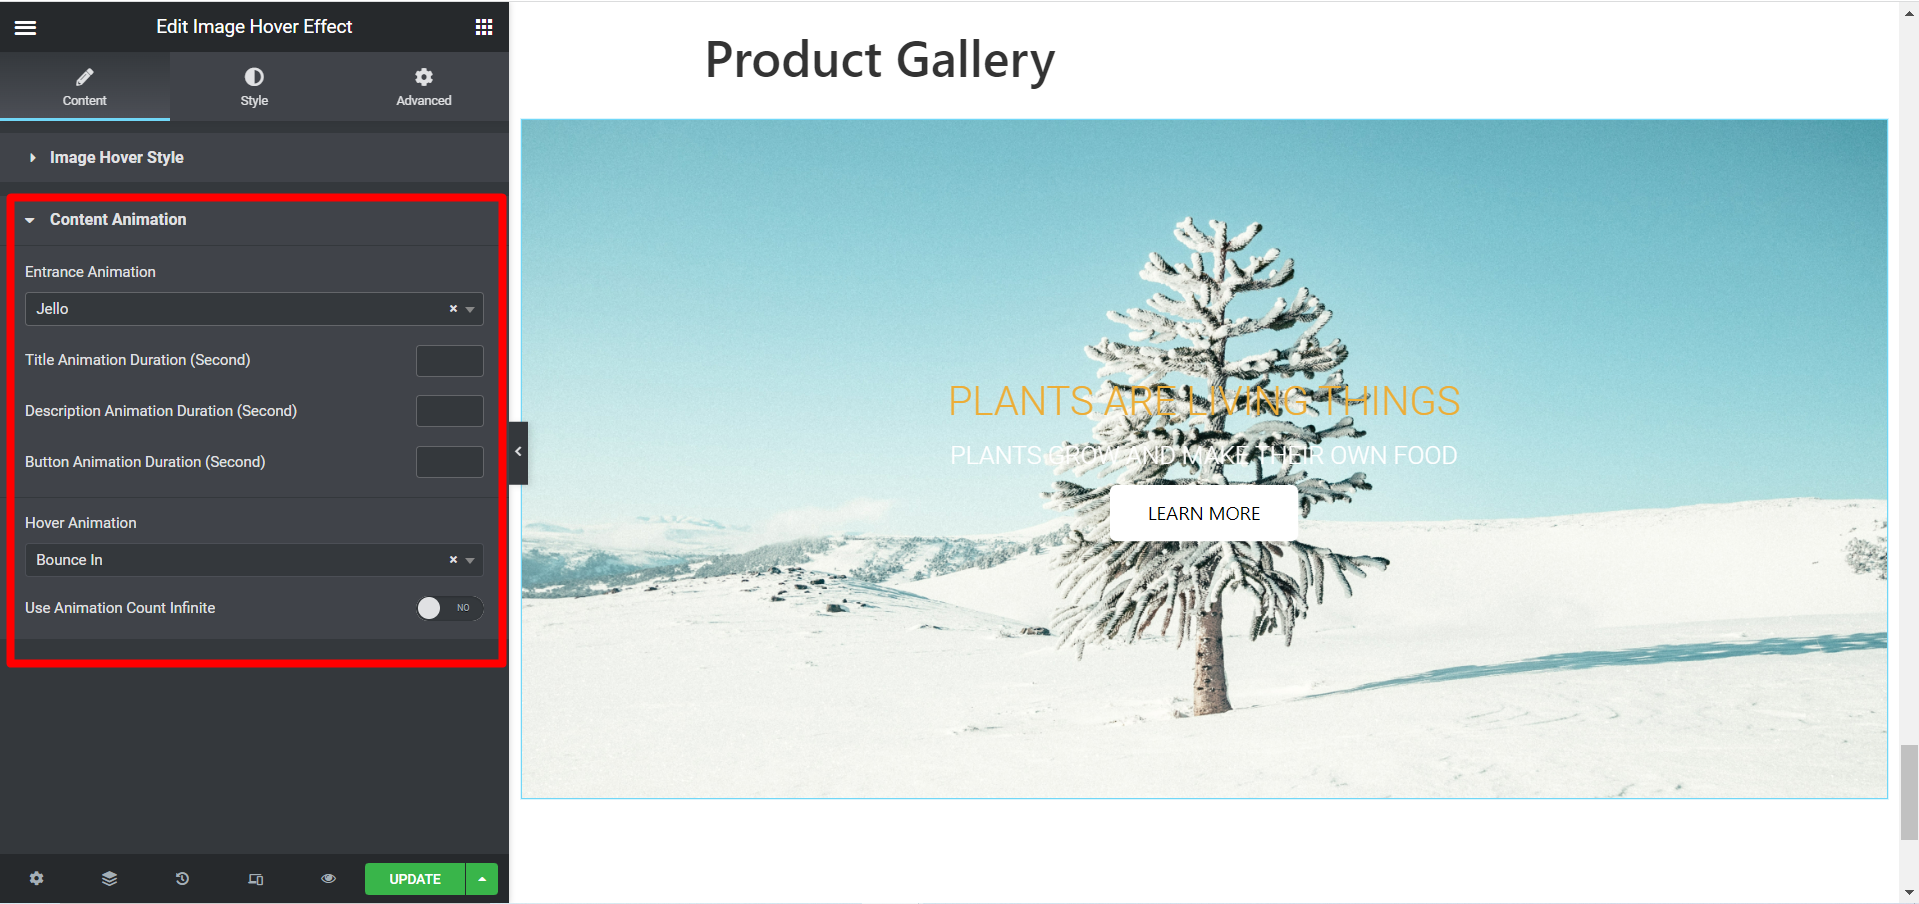 Styling you images is simple with image hover effect widget.